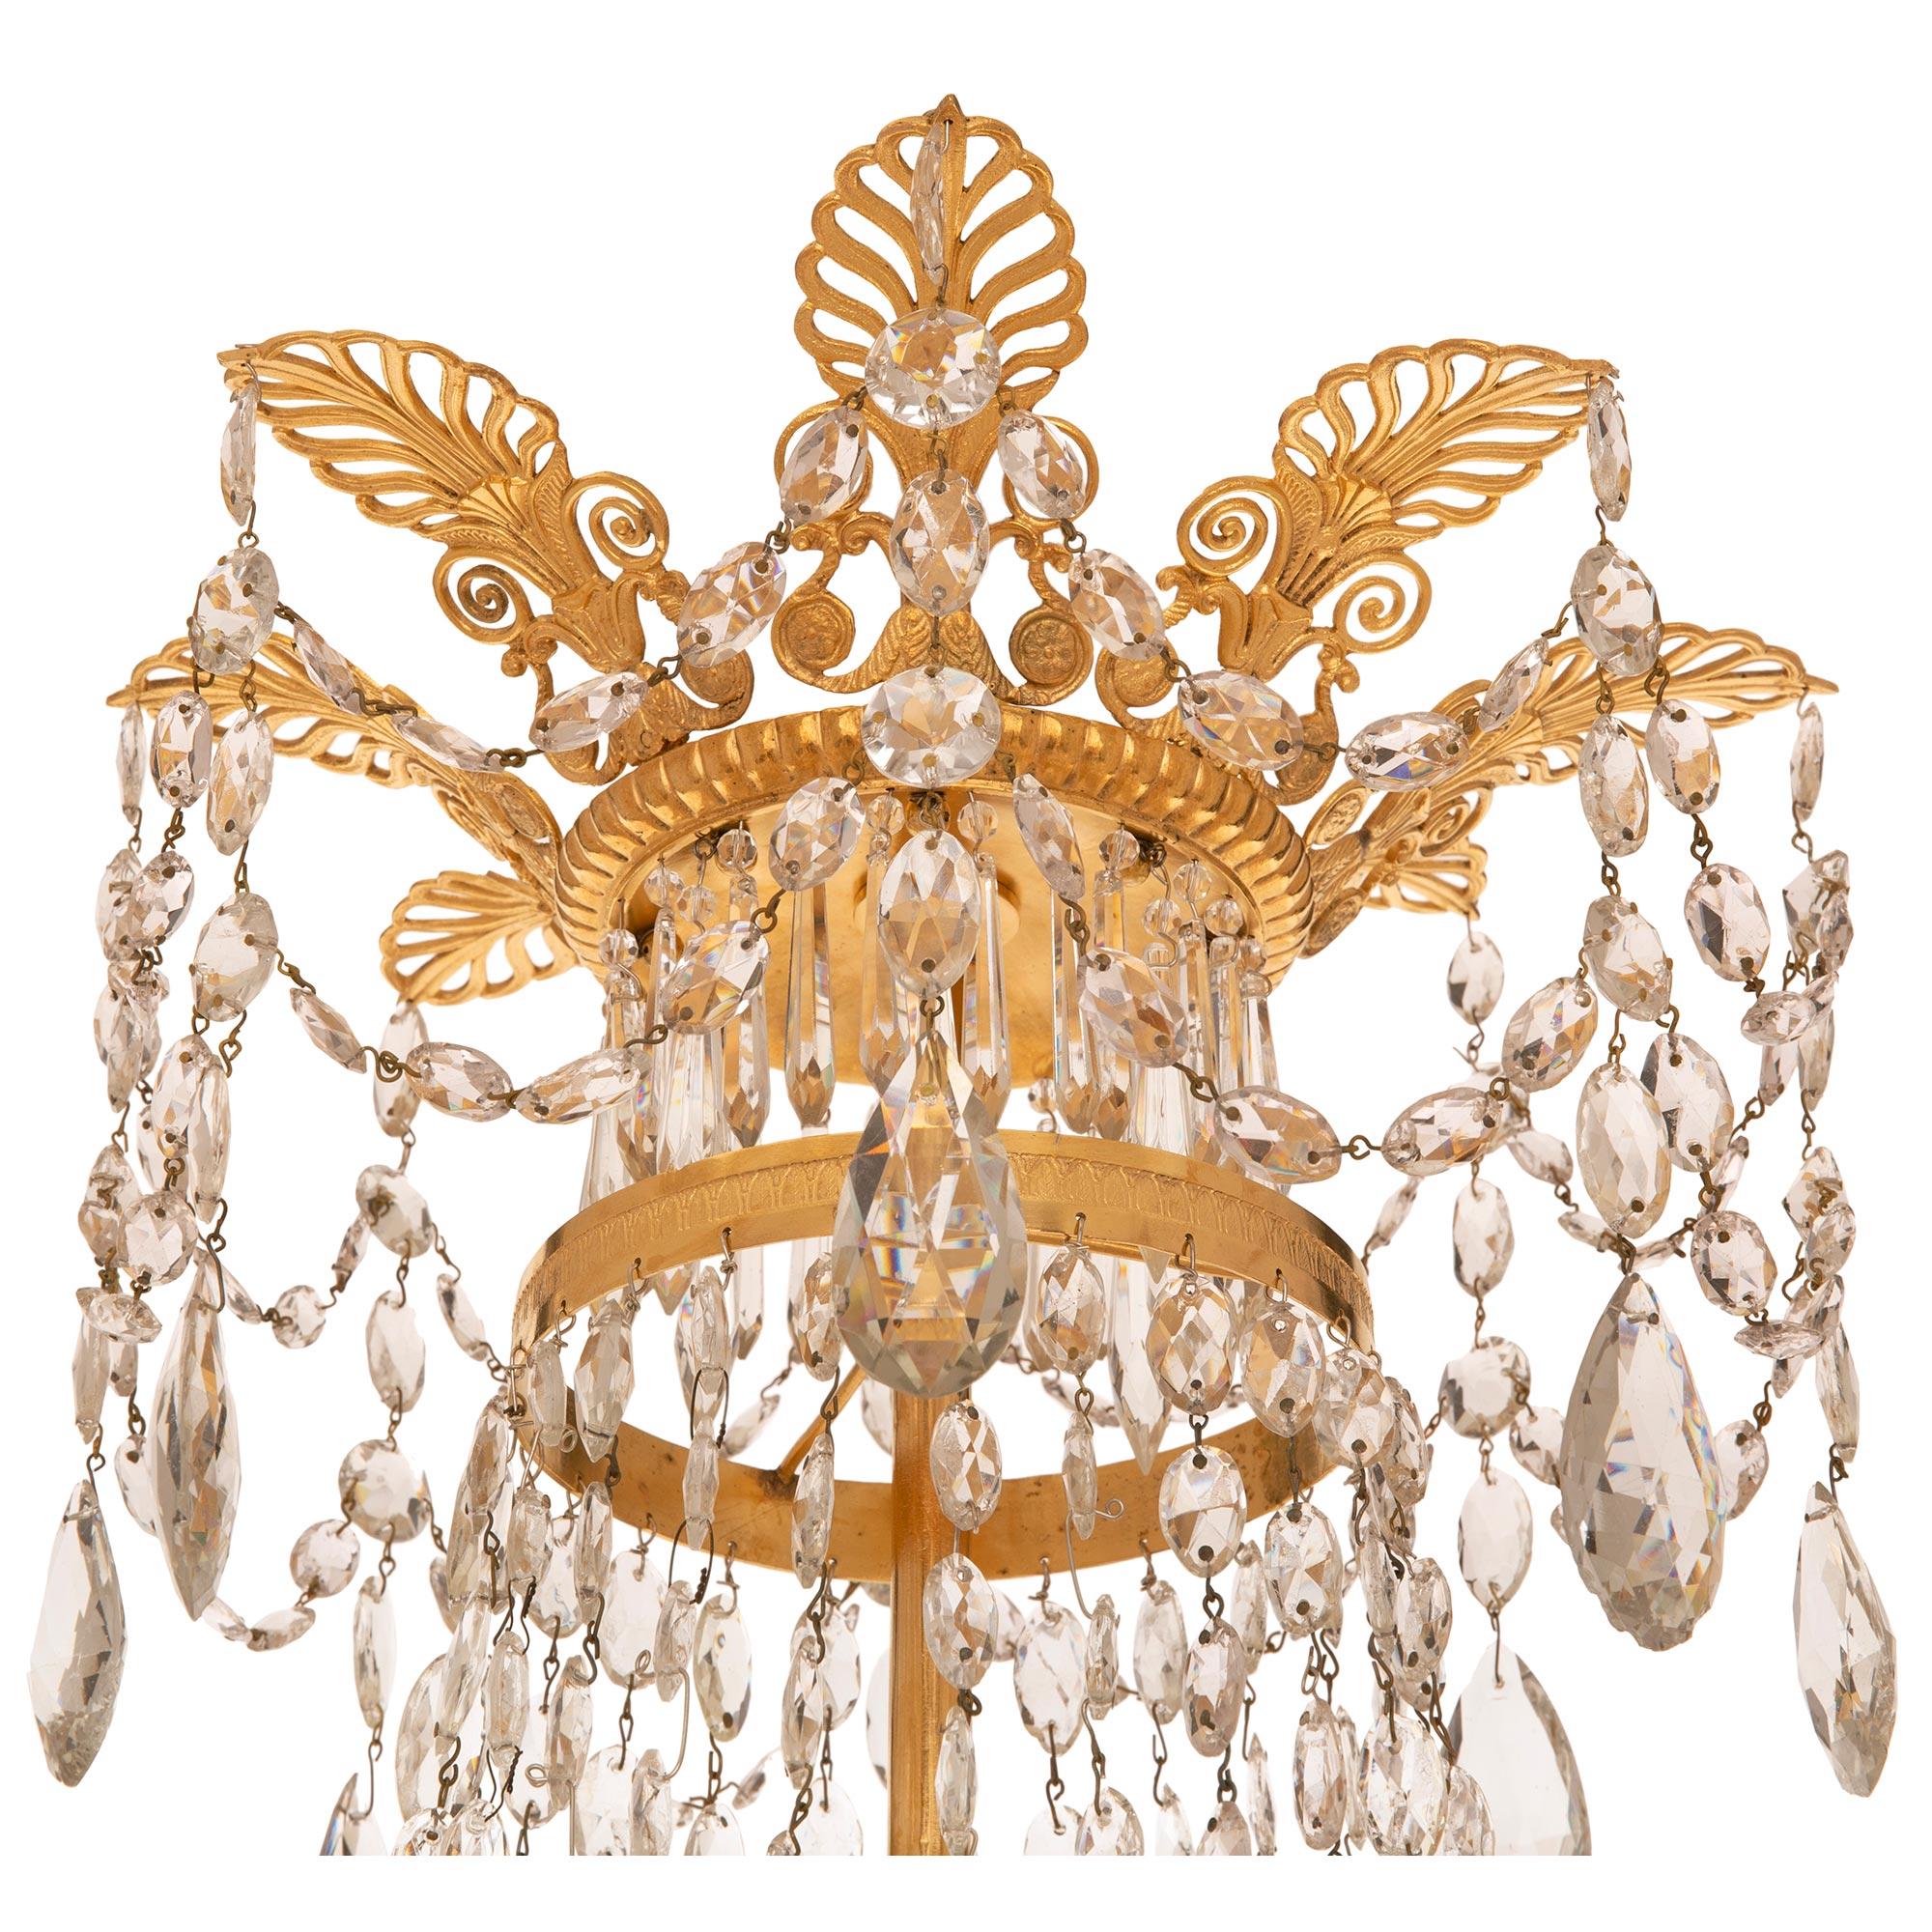 Neoclassical French, 19th Century, Neo-Classical St. Baccarat Crystal and Ormolu Chandelier For Sale